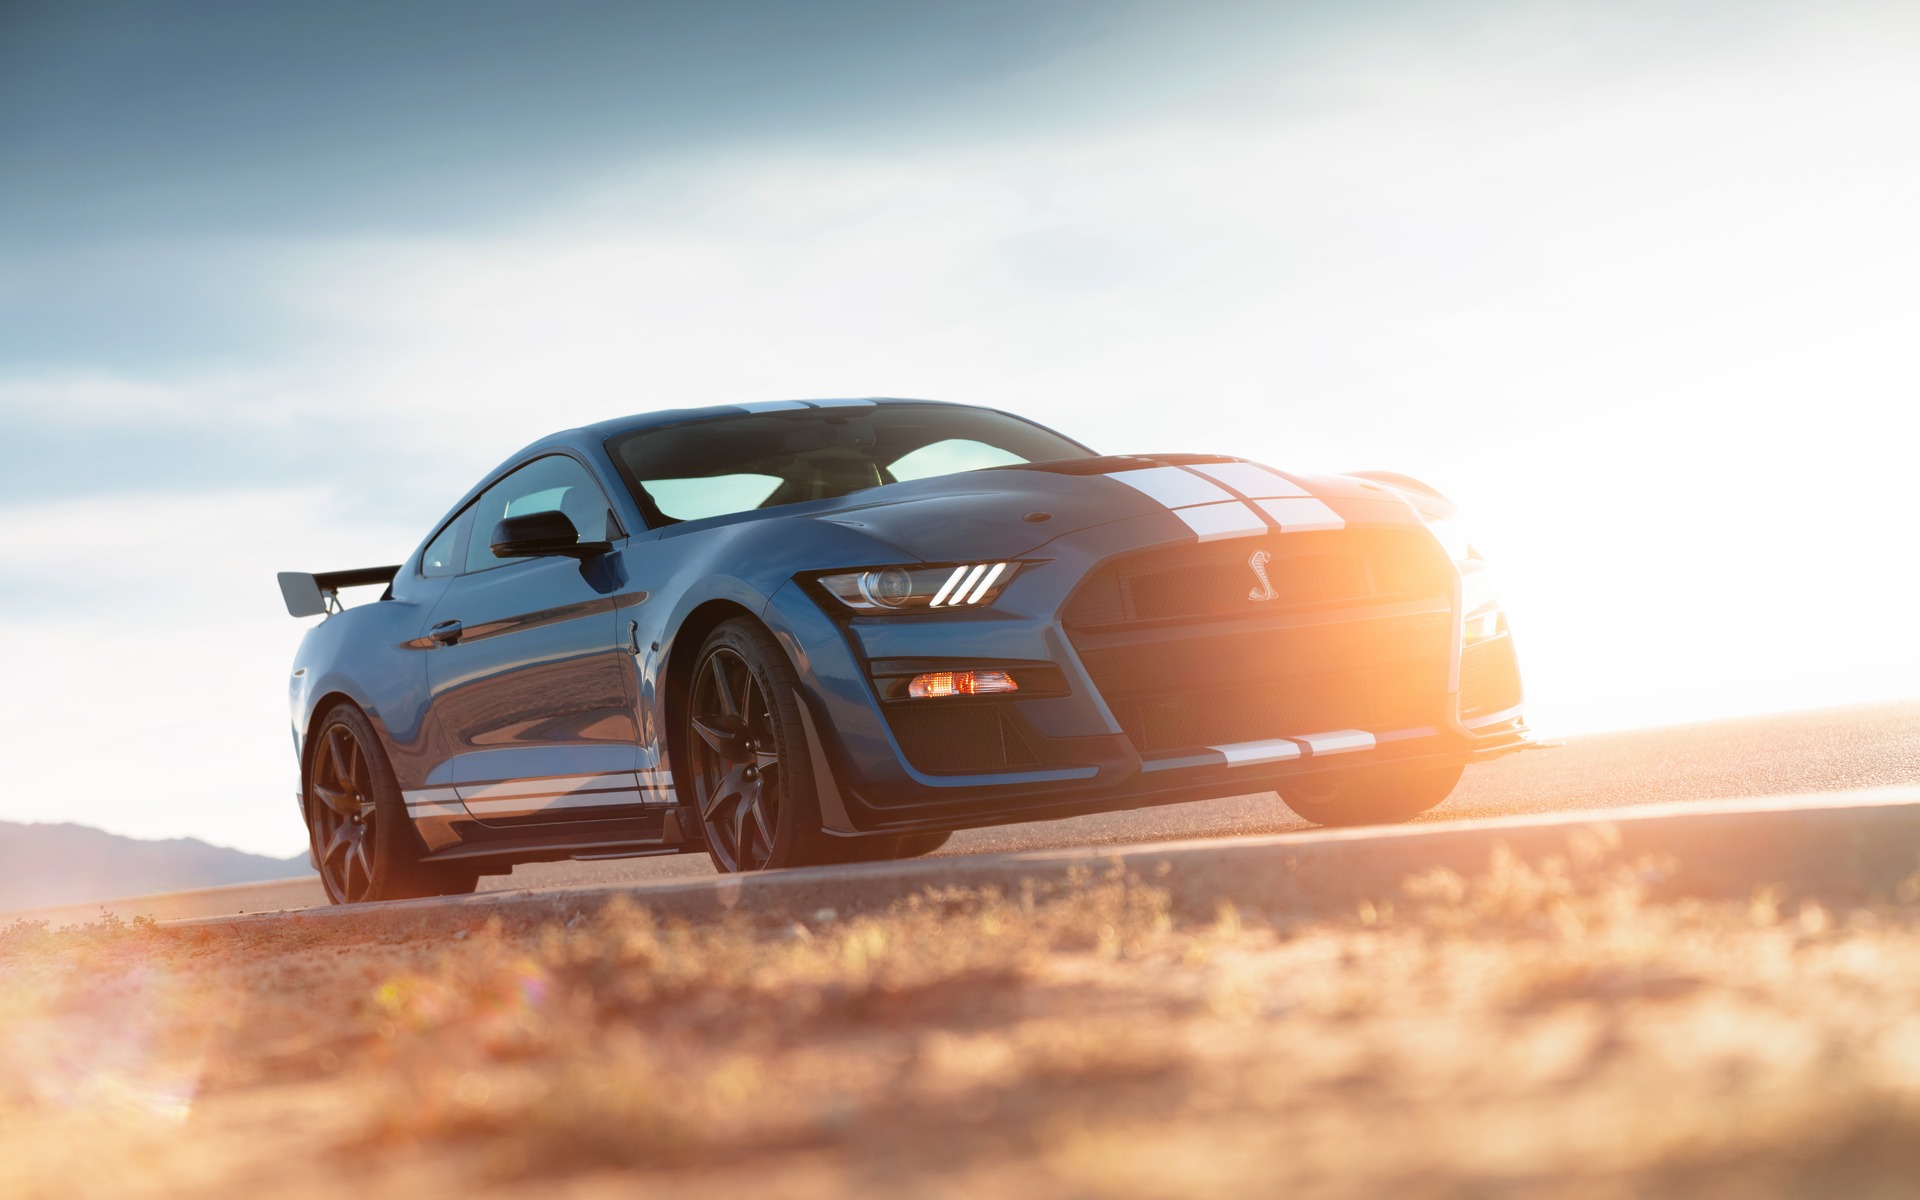 Canadian Premiere of the 2020 Ford Shelby GT500 in Toronto - 5/21